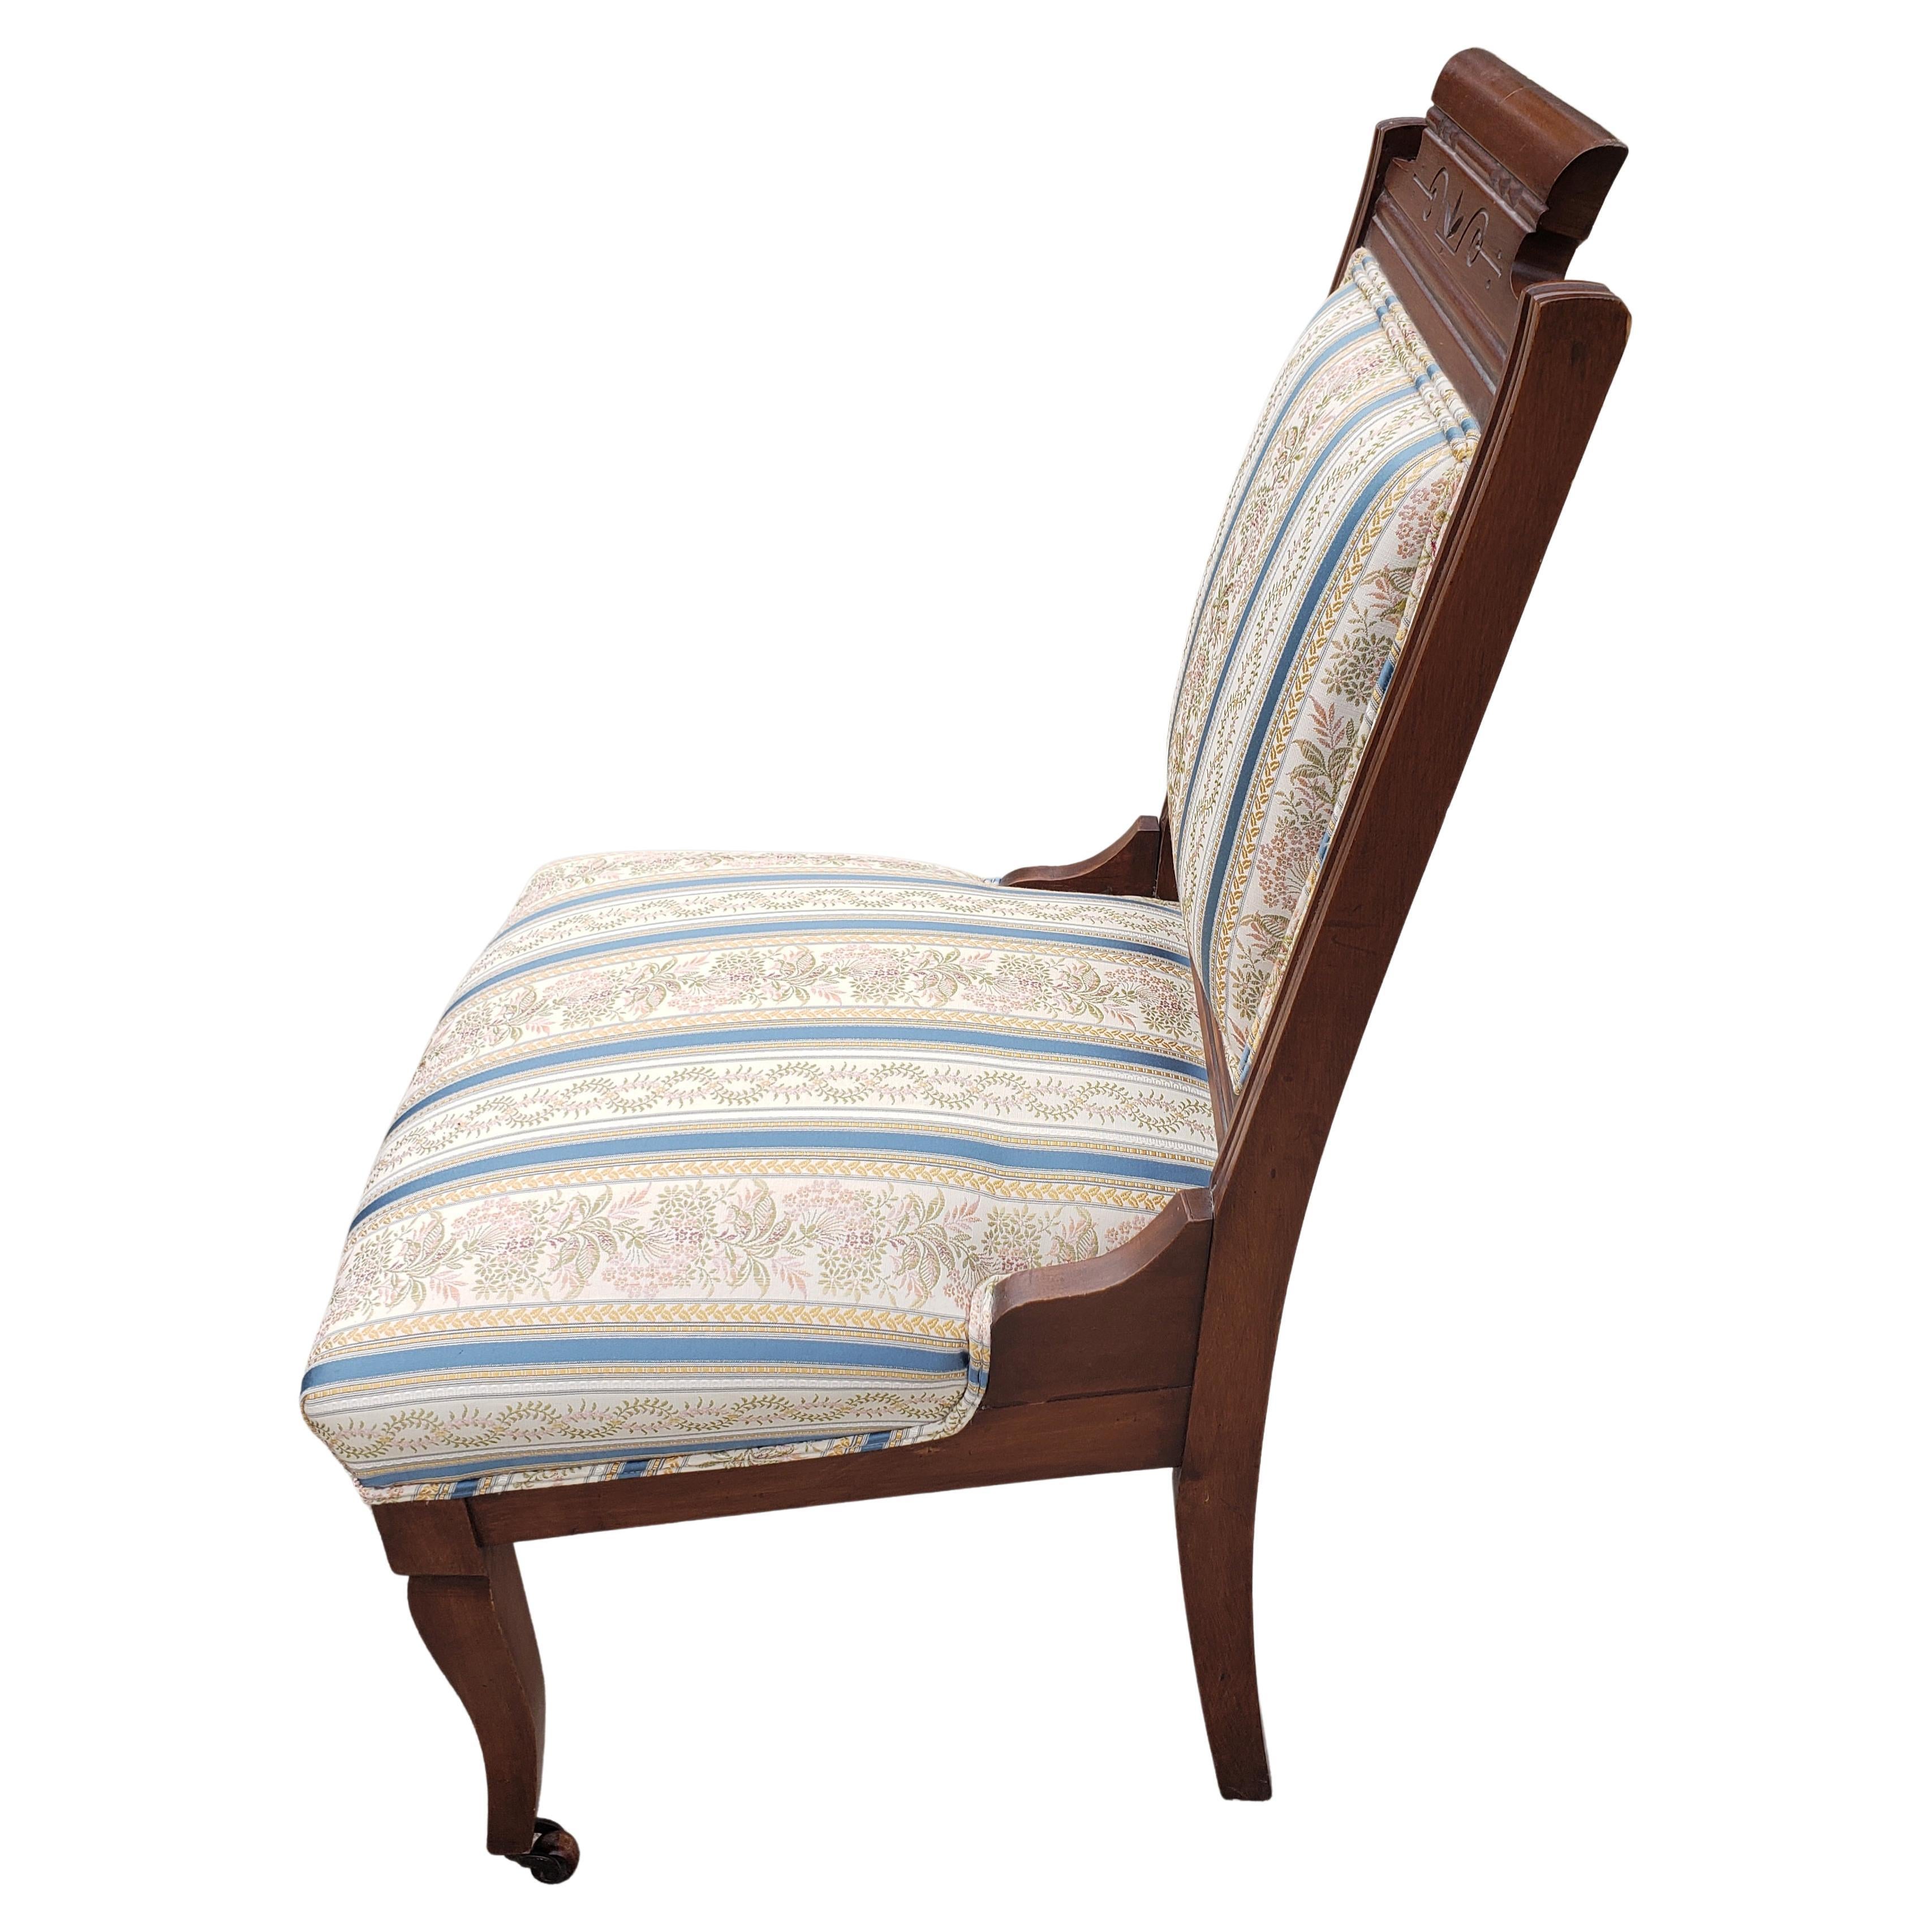 Late Victorian Antique Victorian Striped Upholstered Chairs, Circa 1890s For Sale